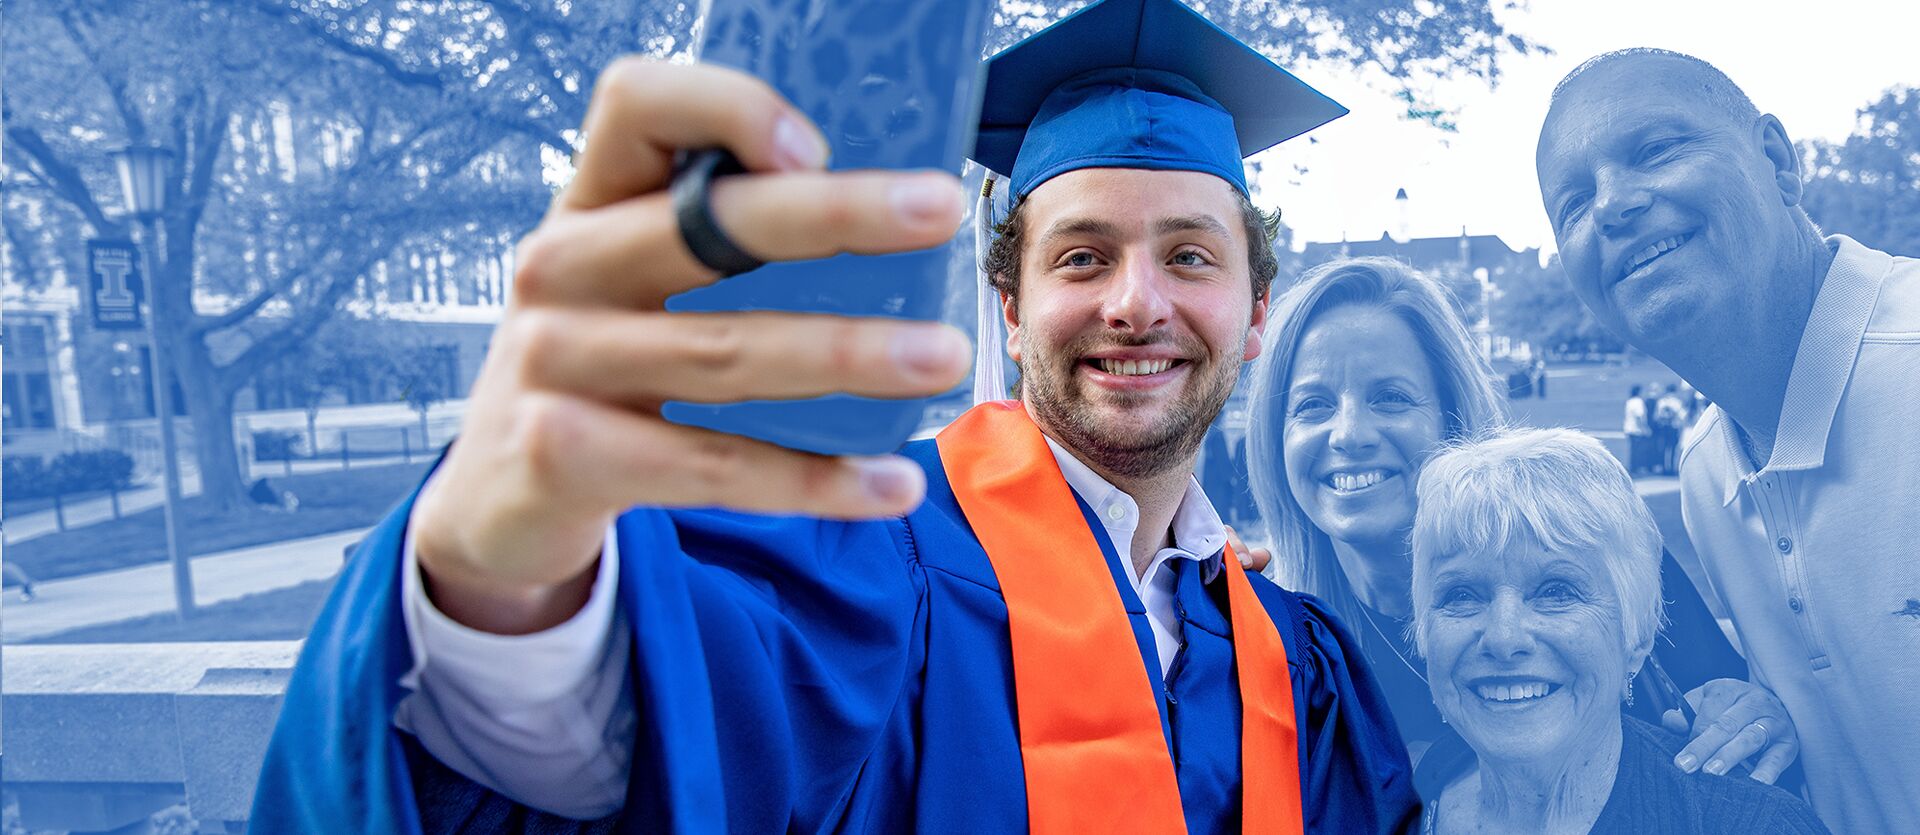 A student snaps a photo of himself in graduation robes